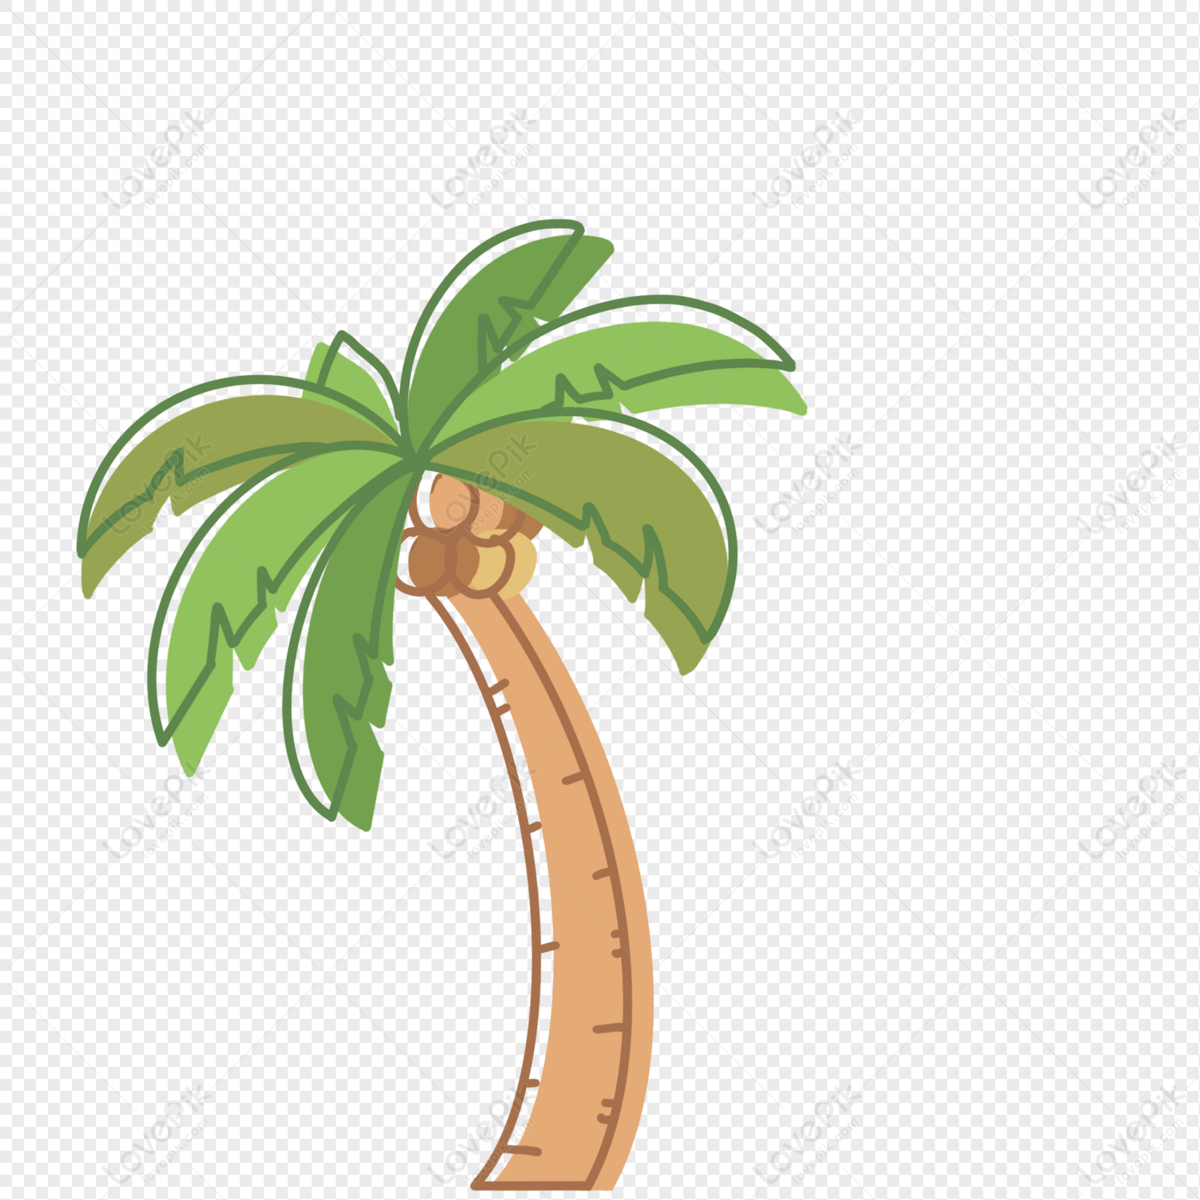 Coconut Tree, Icon Tree, Light Tree, Tree Vector PNG Image And Clipart ...